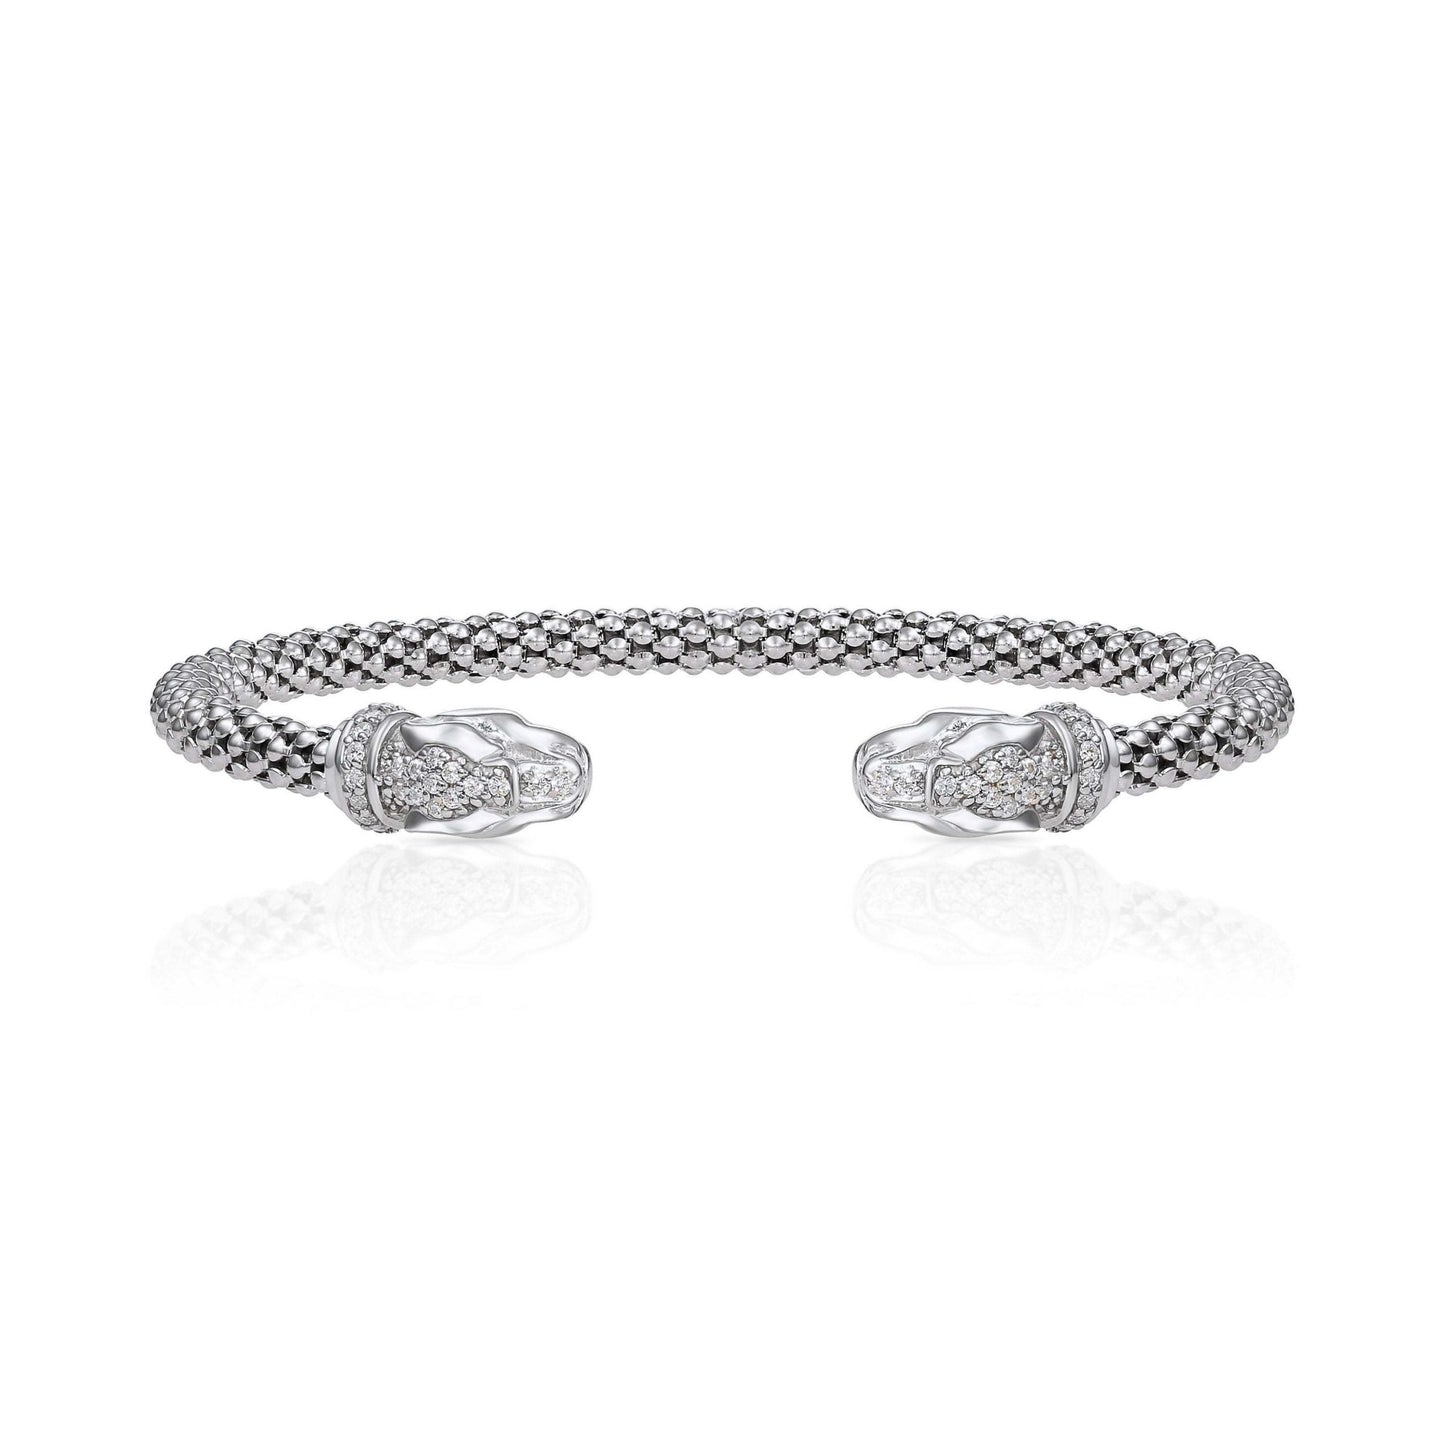 Jaguar Cuff Bracelet in Sterling Silver, Slip On Bangle with Cz Stones, Fits 6 and 7 inch wrist